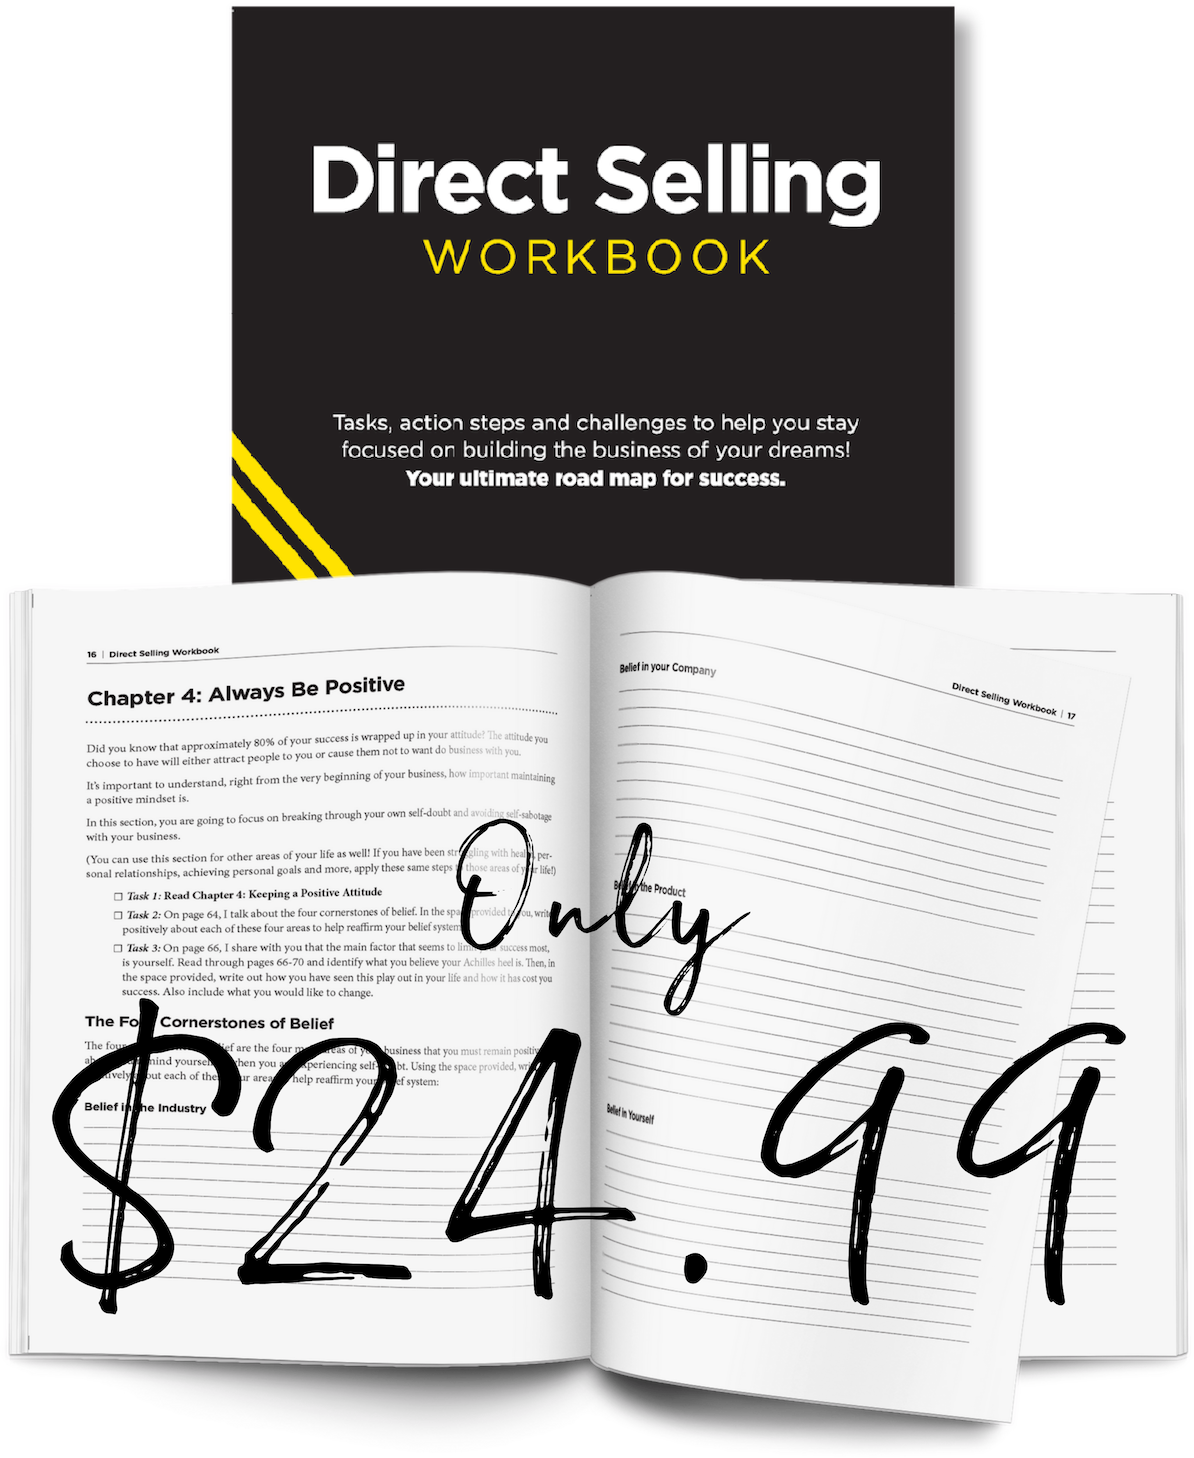 Direct Selling Workbook Promotion PNG image